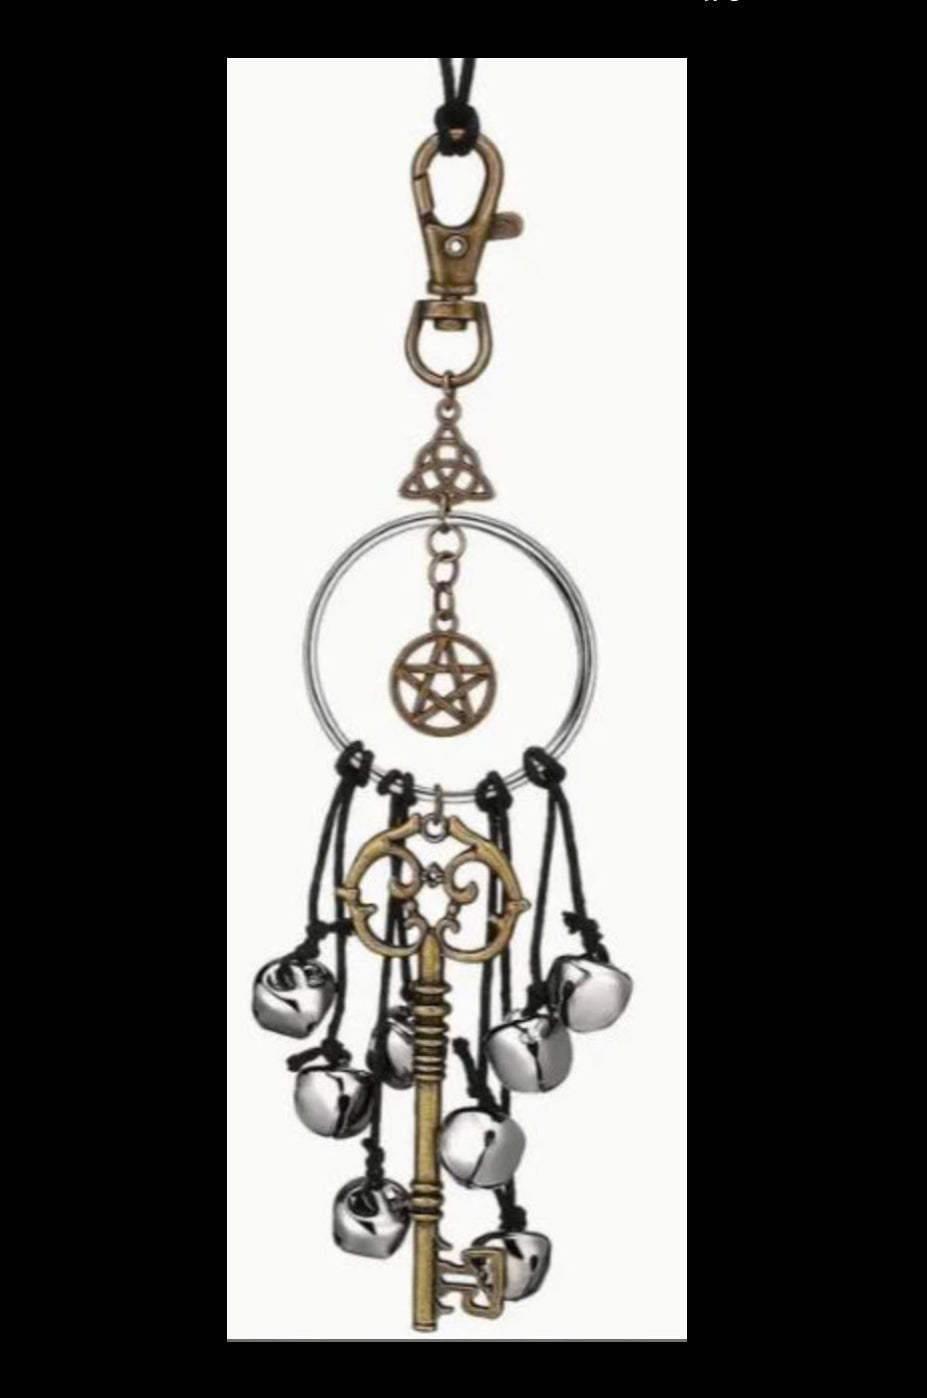 Witches Bell Protection Chime - Lighten Up Shop